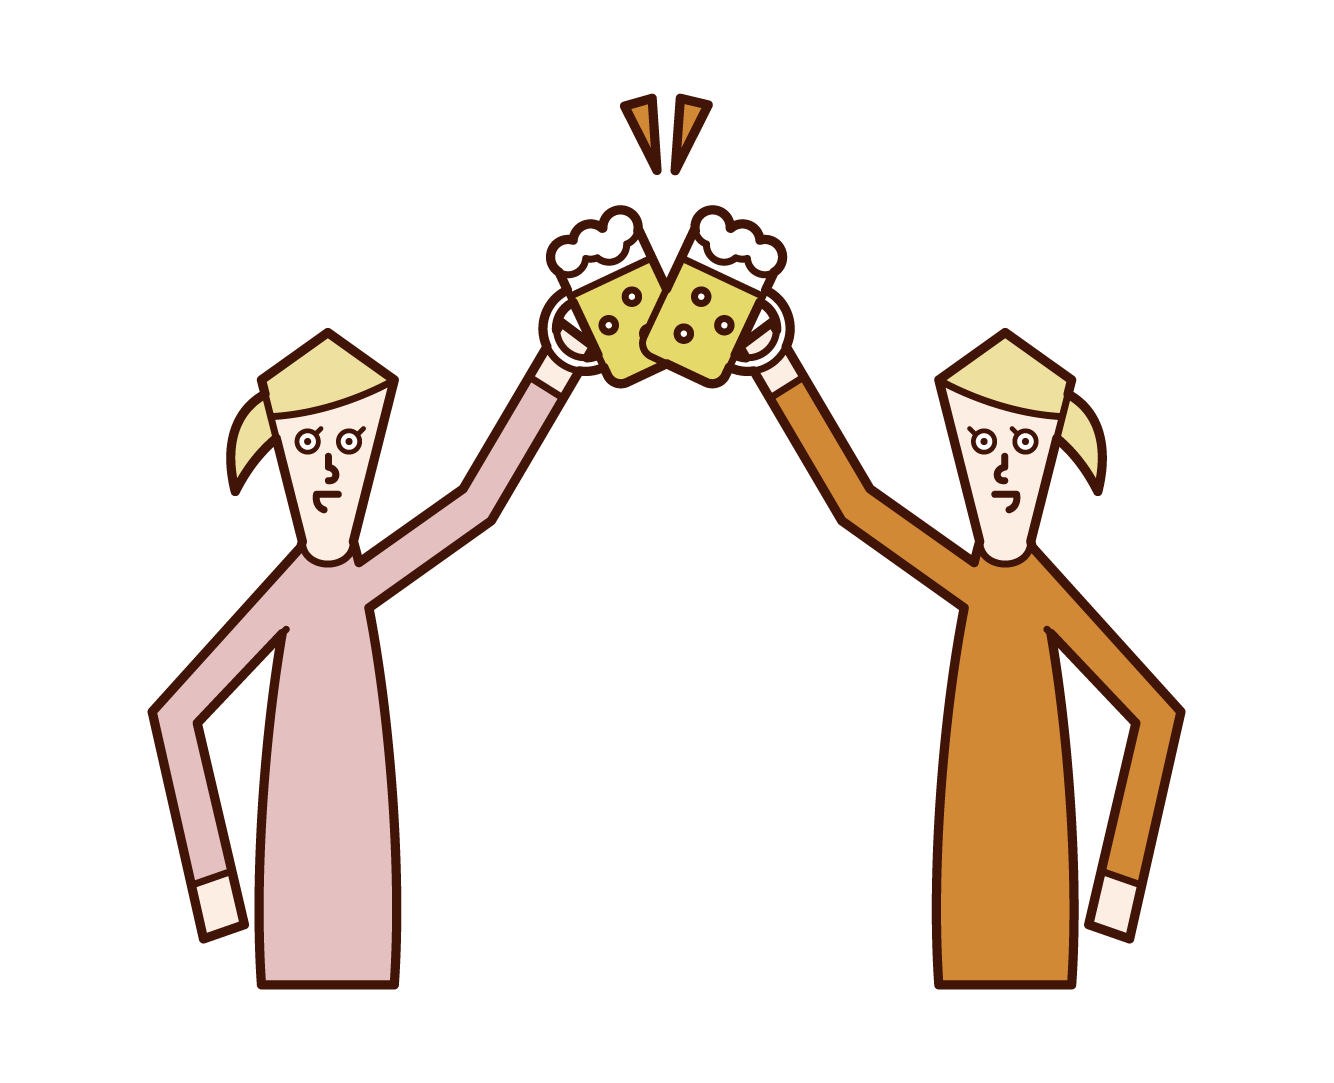 Illustration of people (women) toasting with beer